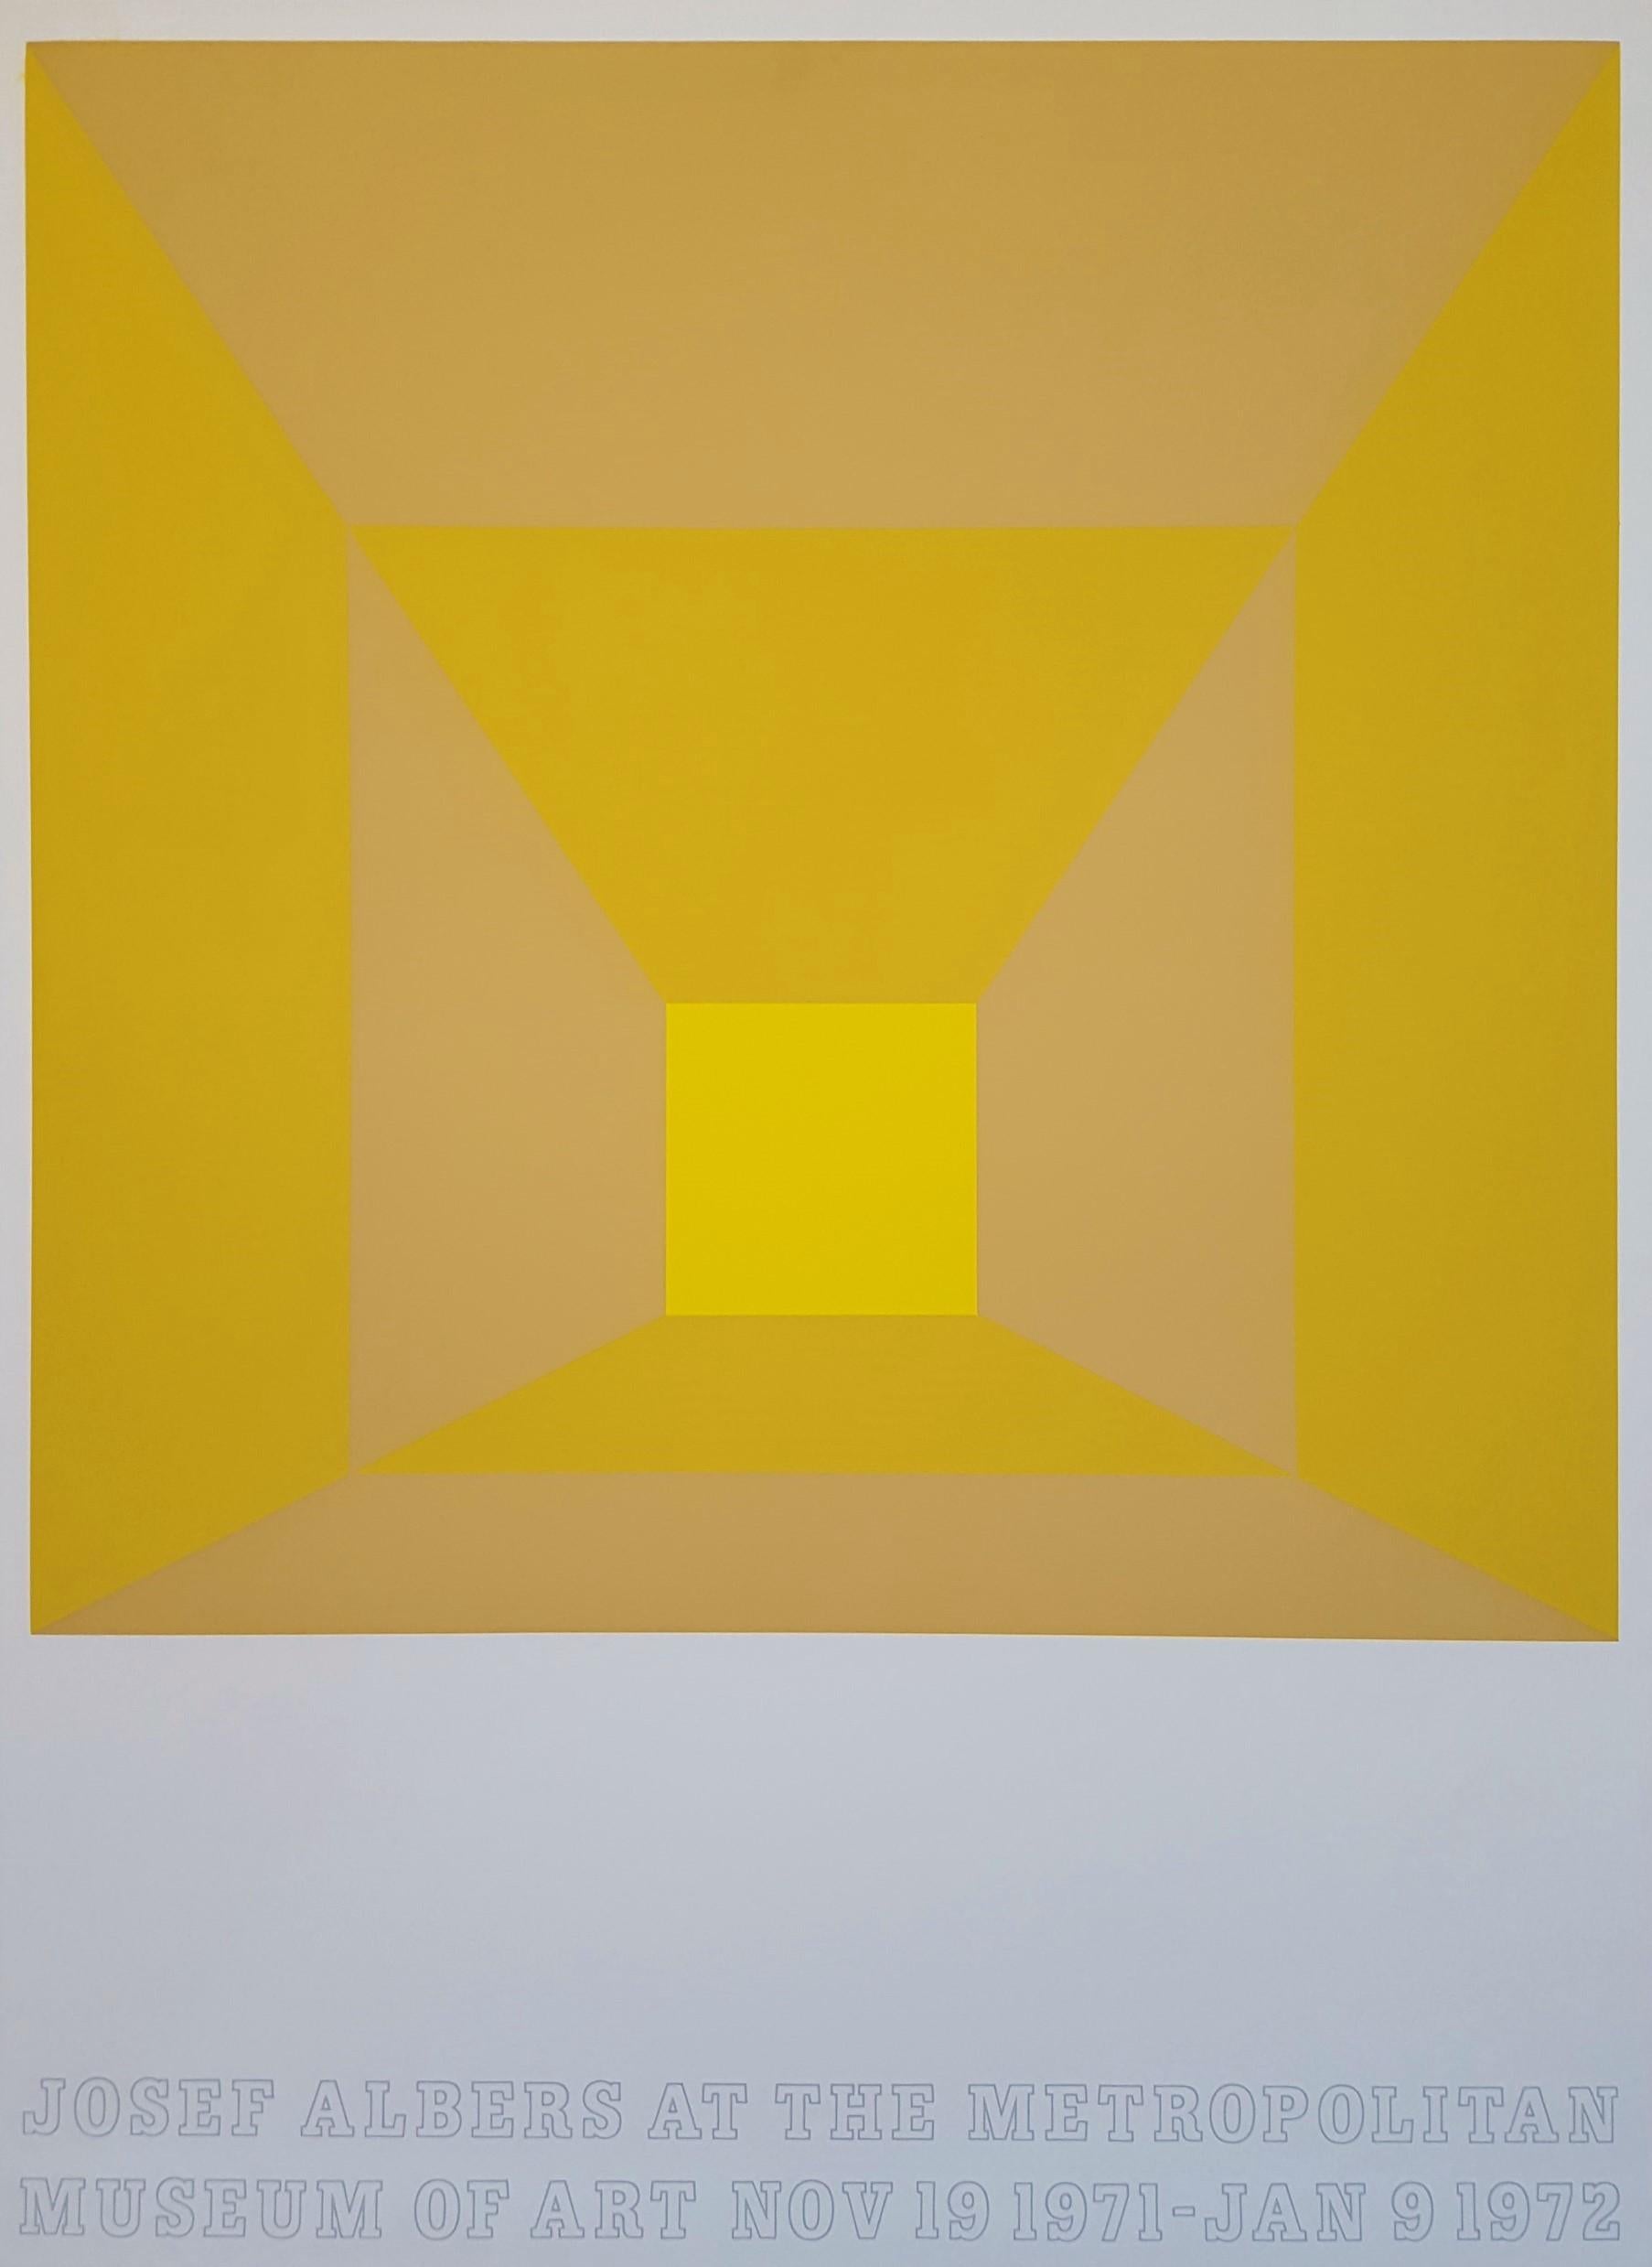 An original screenprint exhibition poster by German-American artist Josef Albers (1888-1976) titled "Josef Albers at the Metropolitan Museum of Art", 1971. It was produced in a signed and numbered edition of 50. There was also an unknown edition